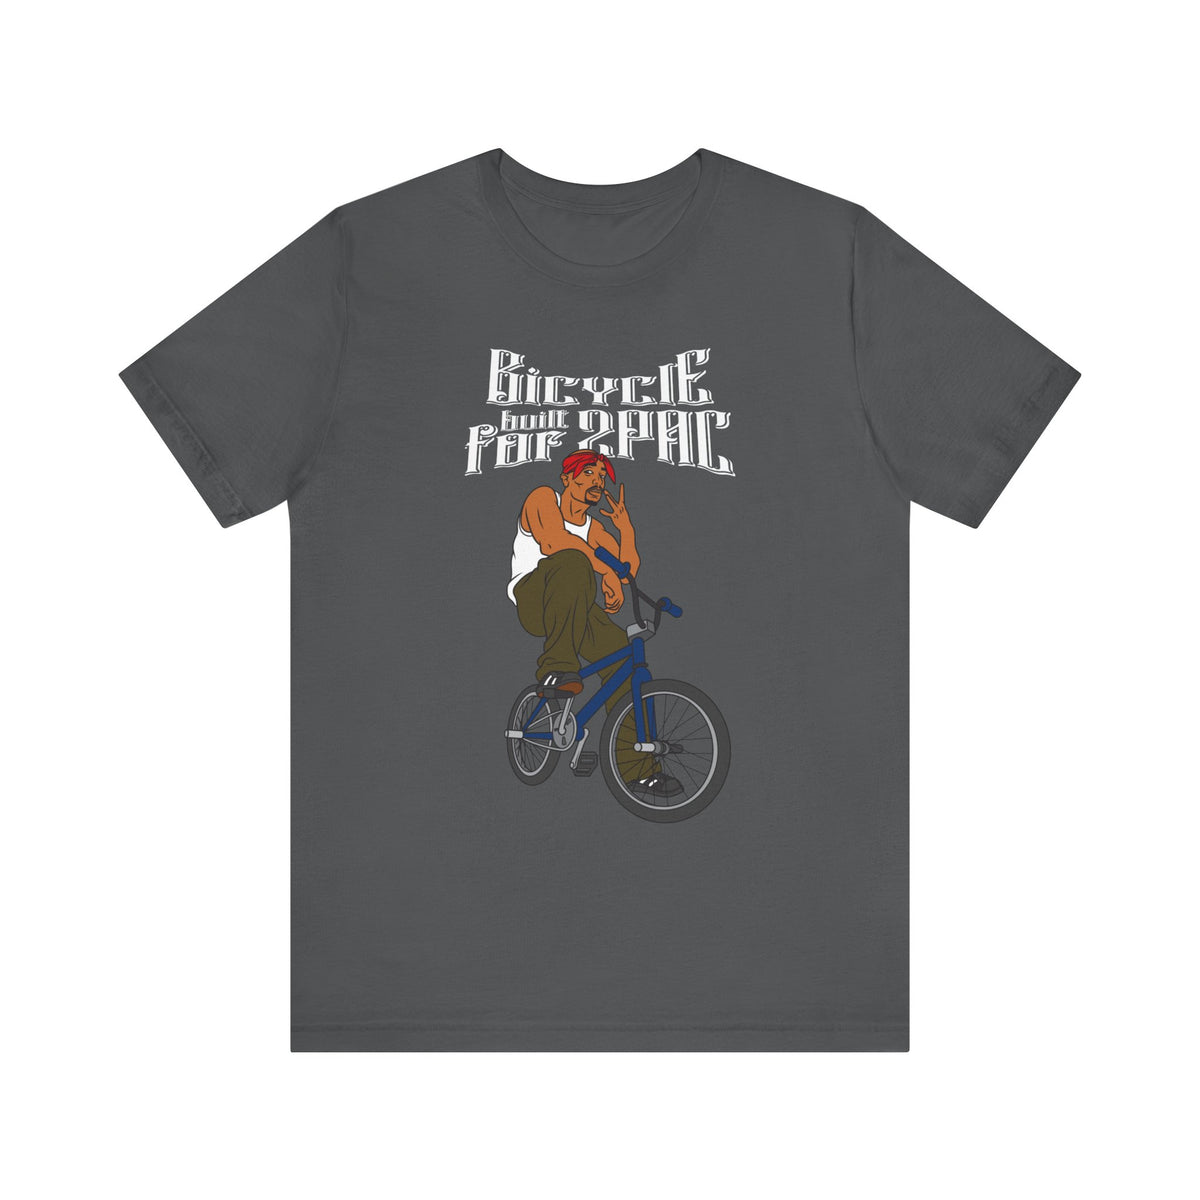 Bicycle Built For 2pac - Men's T-Shirt